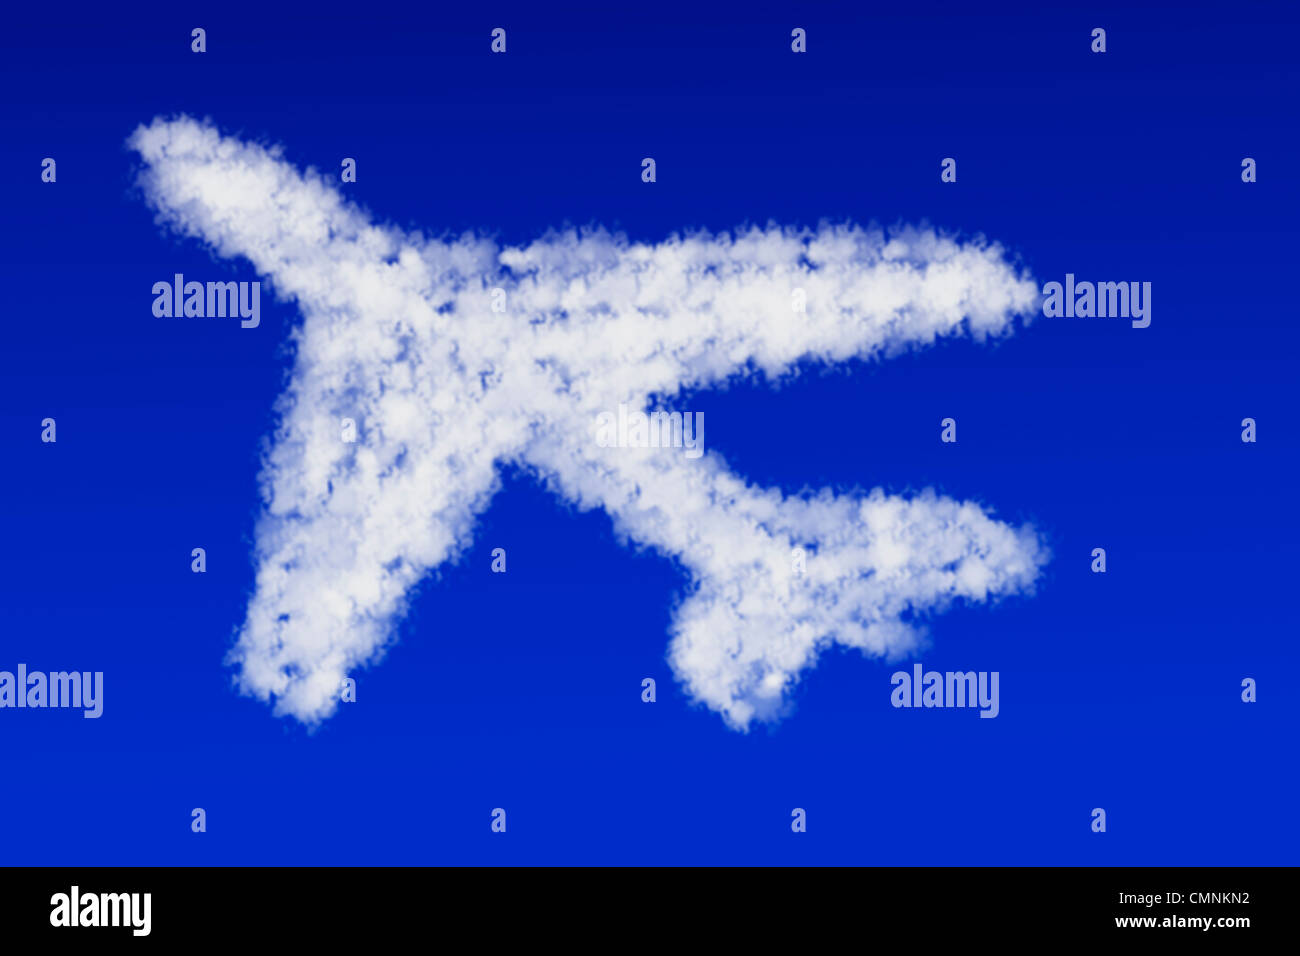 Wolken in Form eines Flugzeuges schweben am blauen Himmel | Clouds in the form of a aircraft floating in the blue sky Stock Photo